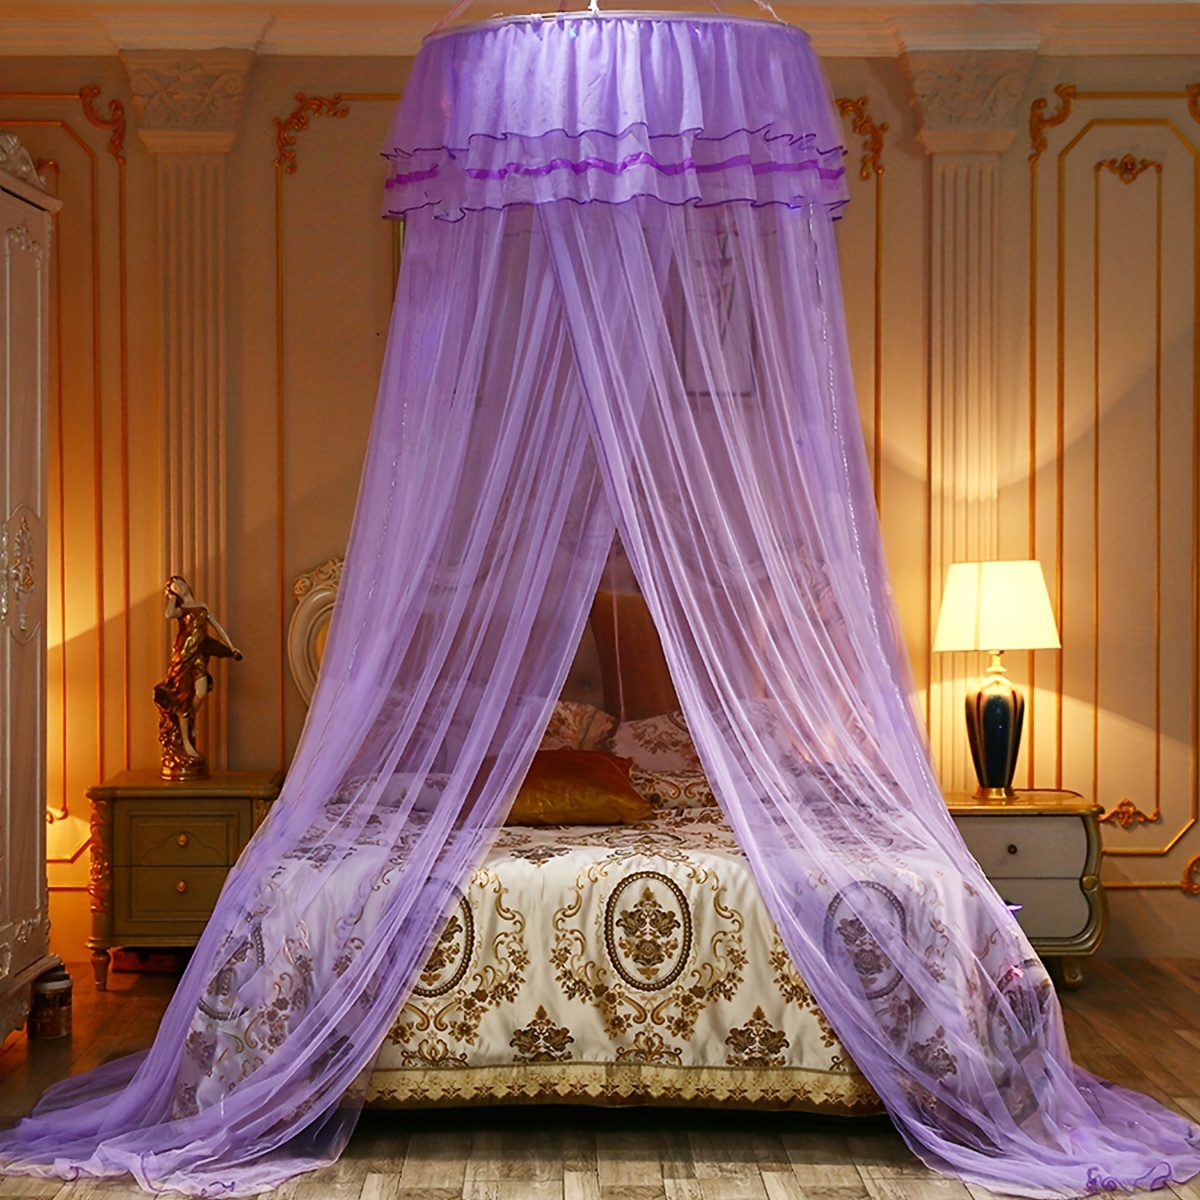 Dome Bed Canopy Ceiling Mosquito Net Unique Style Dome Bed Netting Bed  Curtains Canopy for Twin Full Queen King Bed Hooks Super Glue Easy to  Install